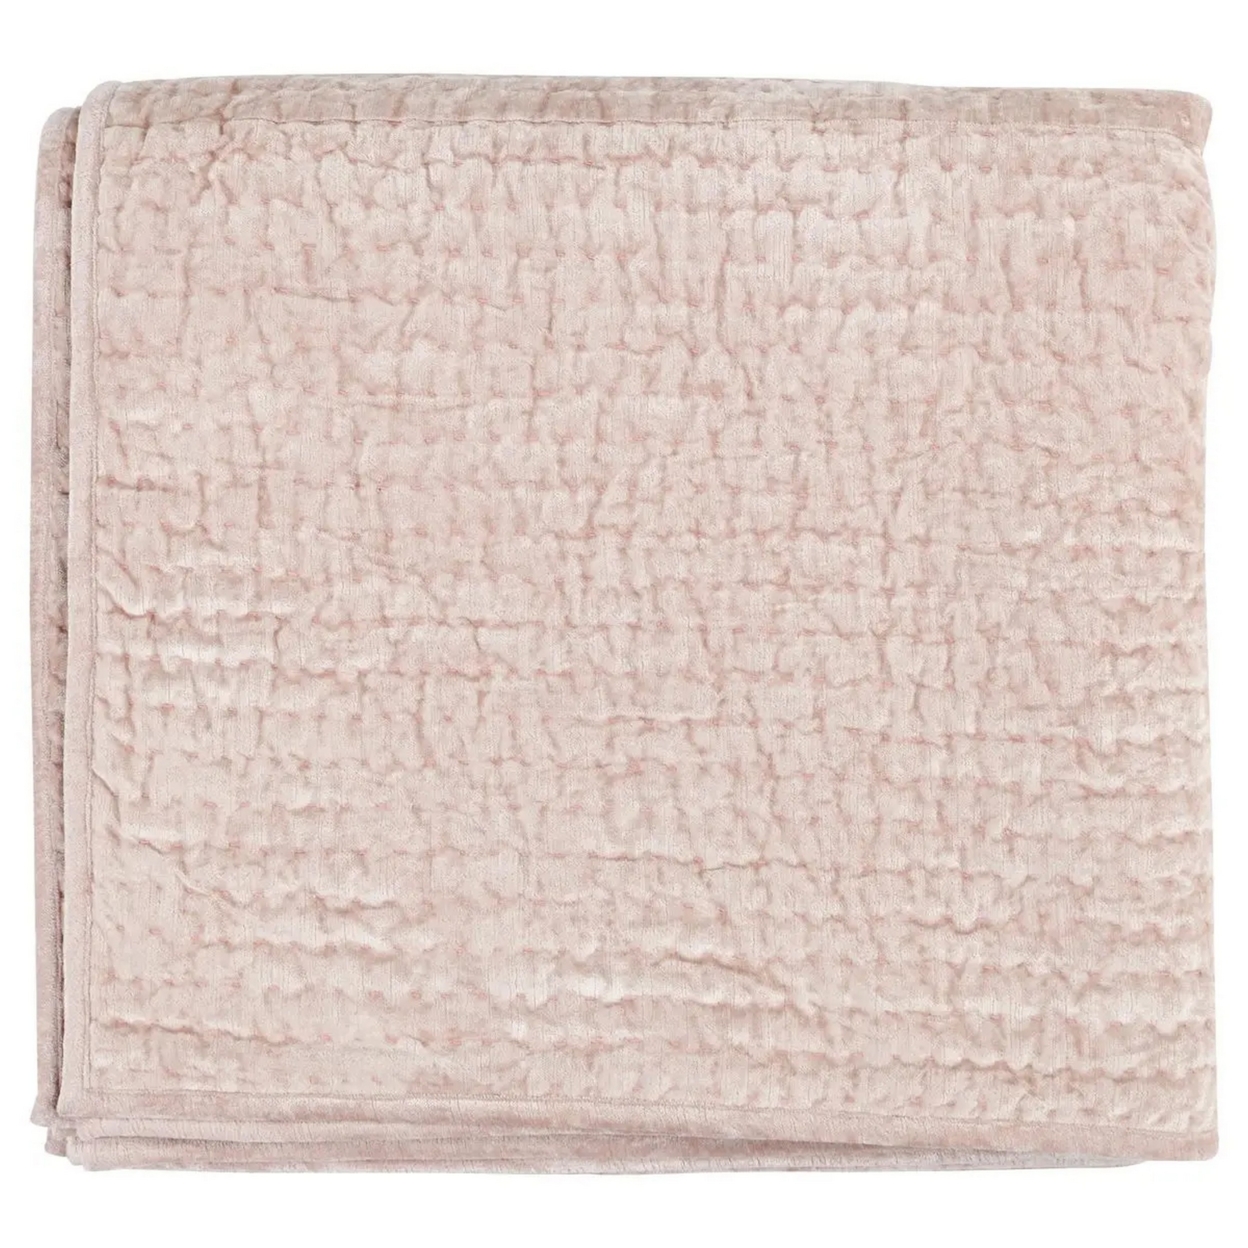 Lipa 92 X 96 Classic Handmade Queen Quilt With Polyfill And Cotton, Pink- Saltoro Sherpi